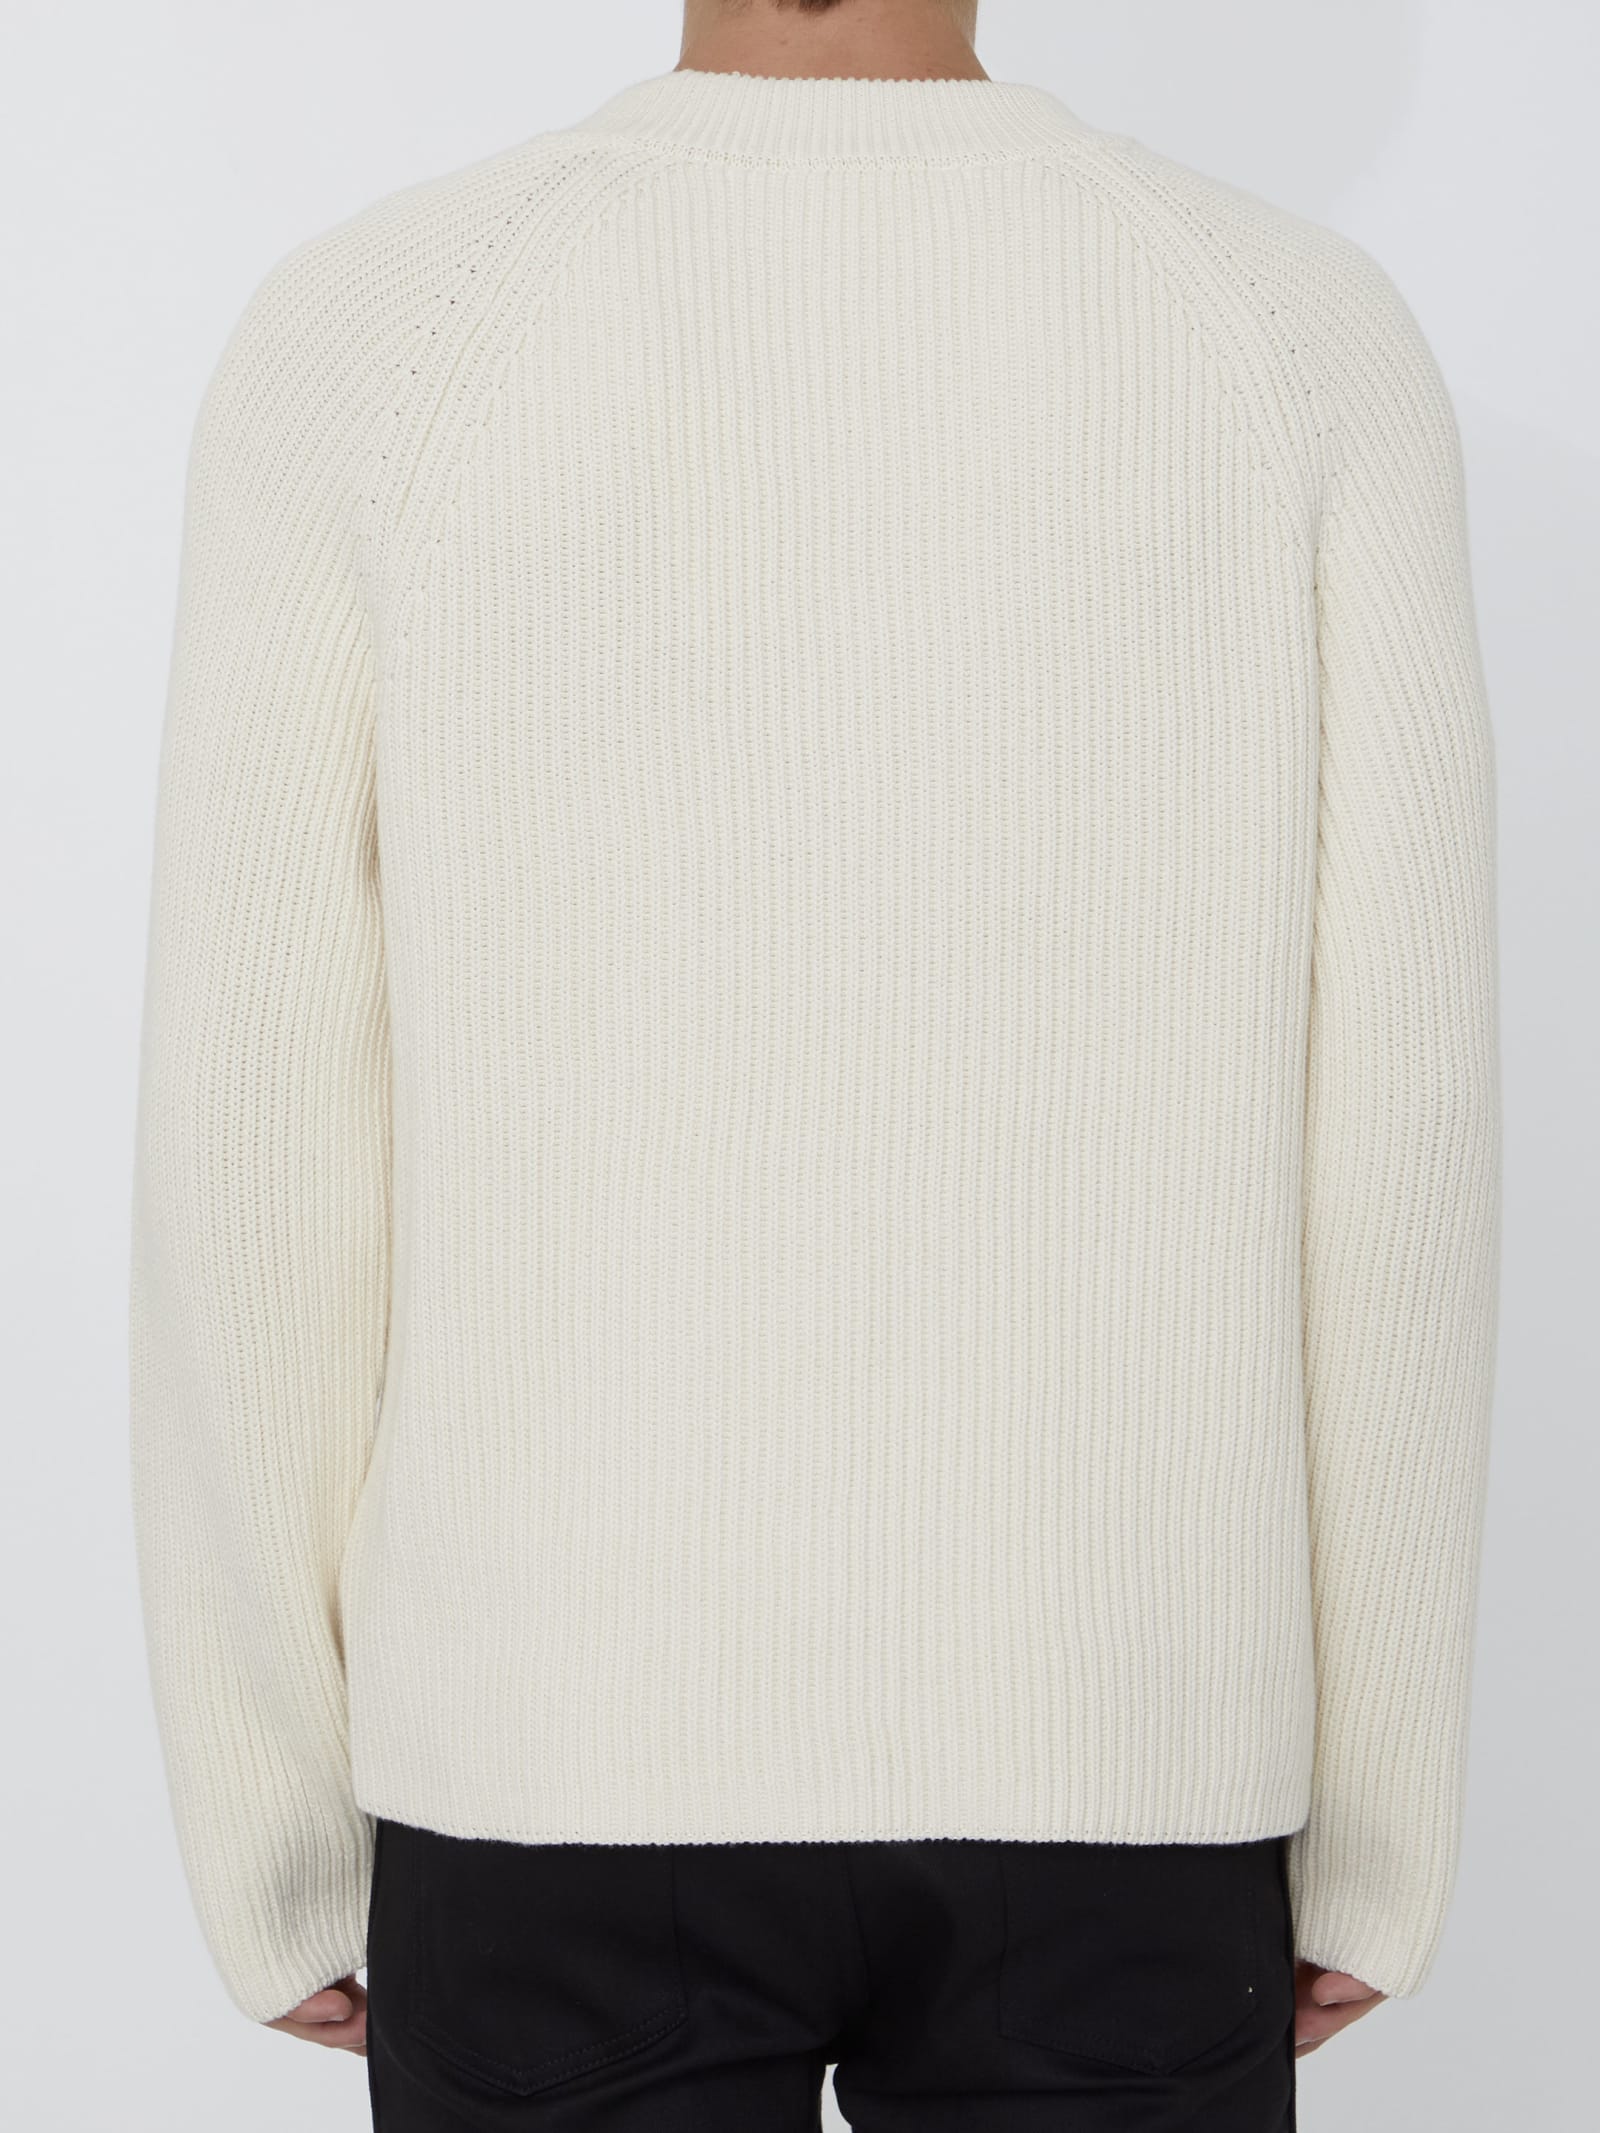 Shop Ami Alexandre Mattiussi Ivory Jumper With Patch